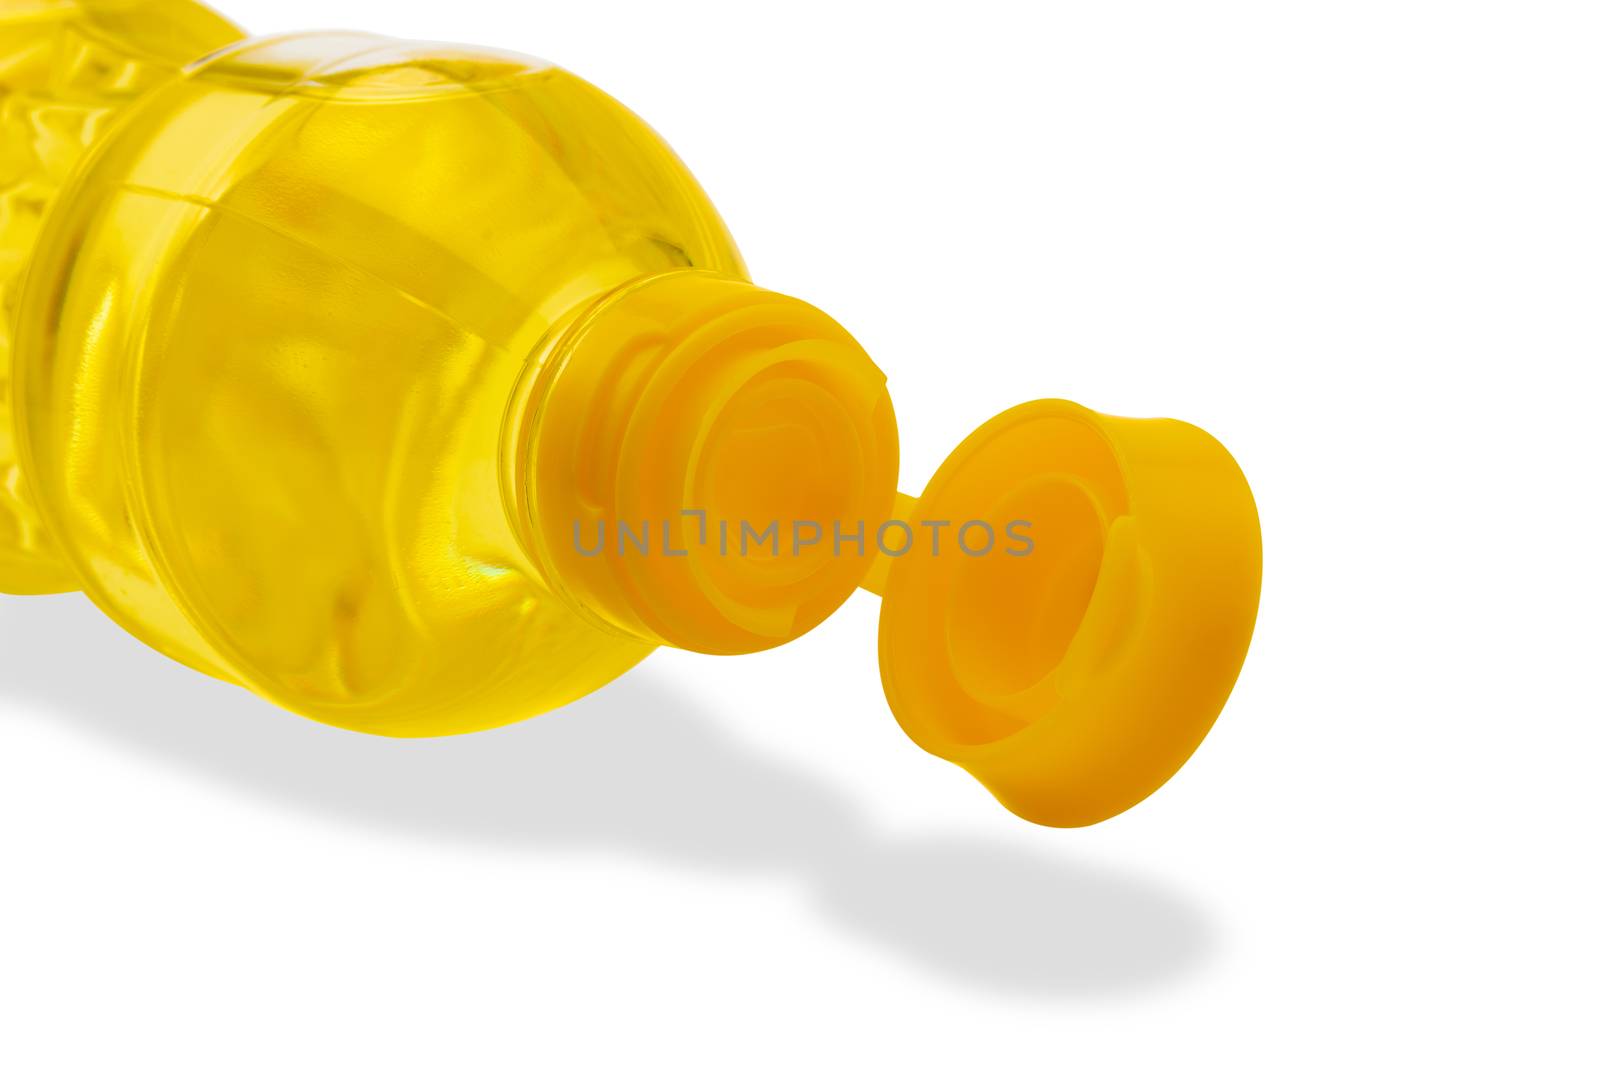 Vegetable oil in plastic bottle isolated on a white background by kirisa99